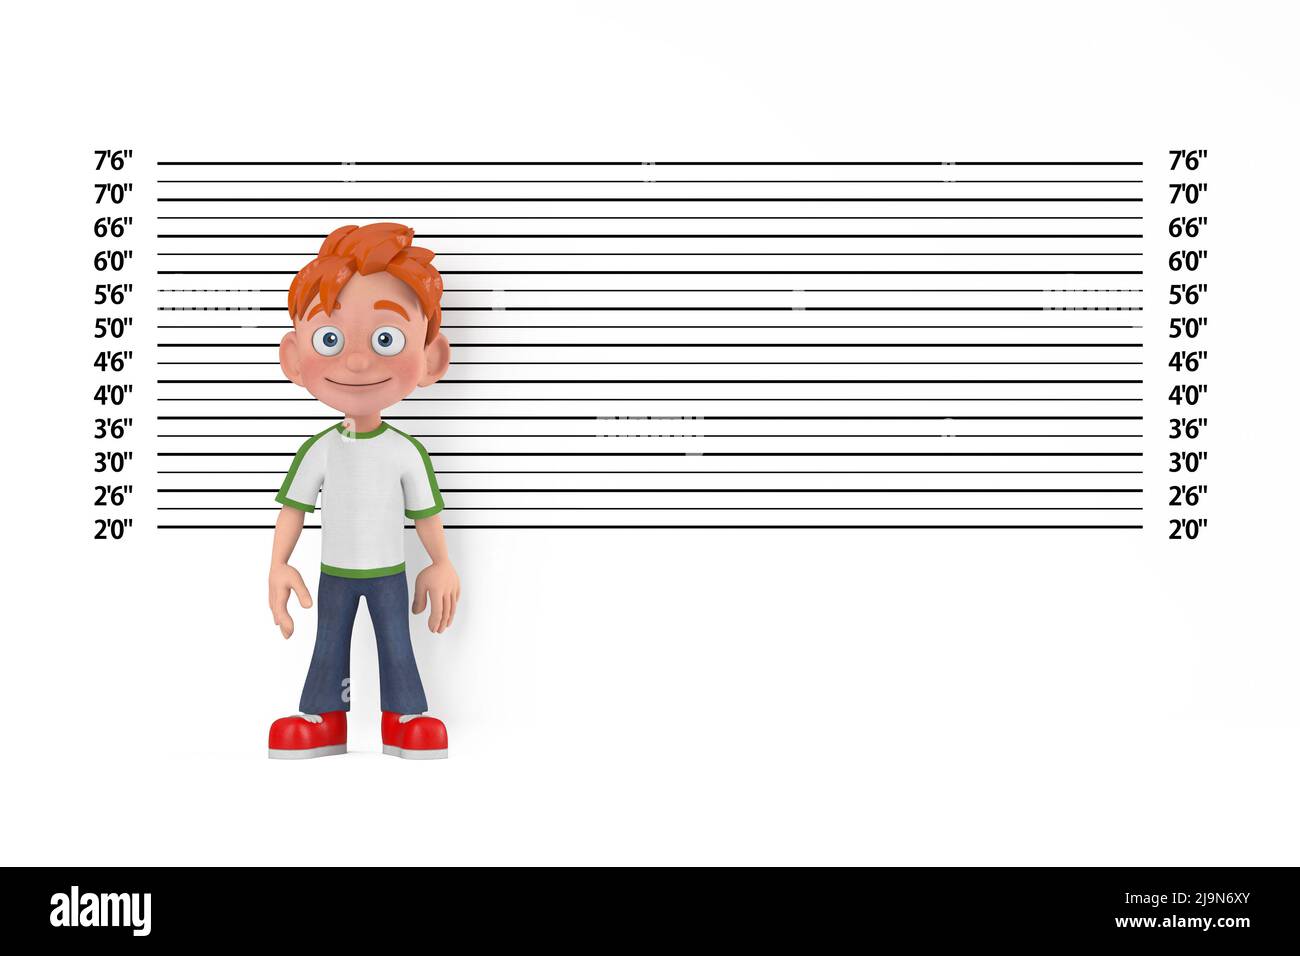 Cartoon Little Boy Teen Person Character Mascot in front of Police Lineup or Mugshot Background extreme closeup. 3d Rendering Stock Photo